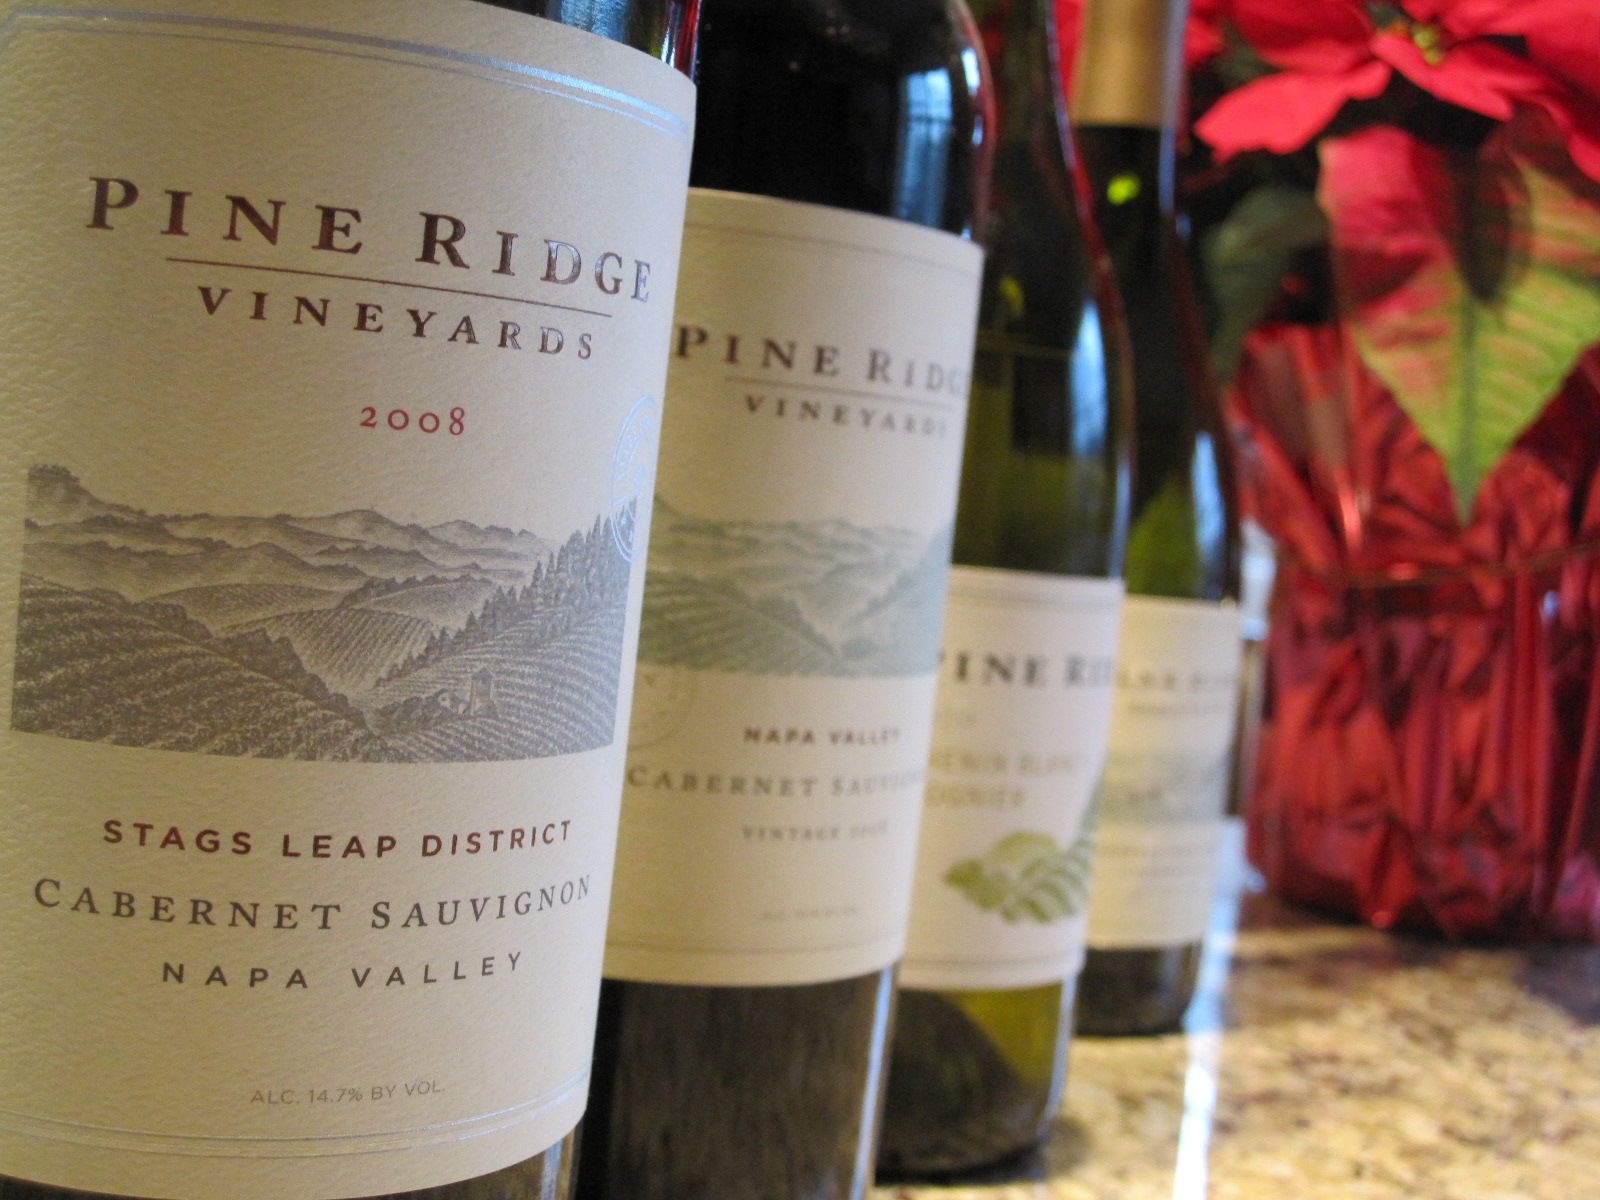 Pine Ridge Vineyards: Wines for Your Holiday Table